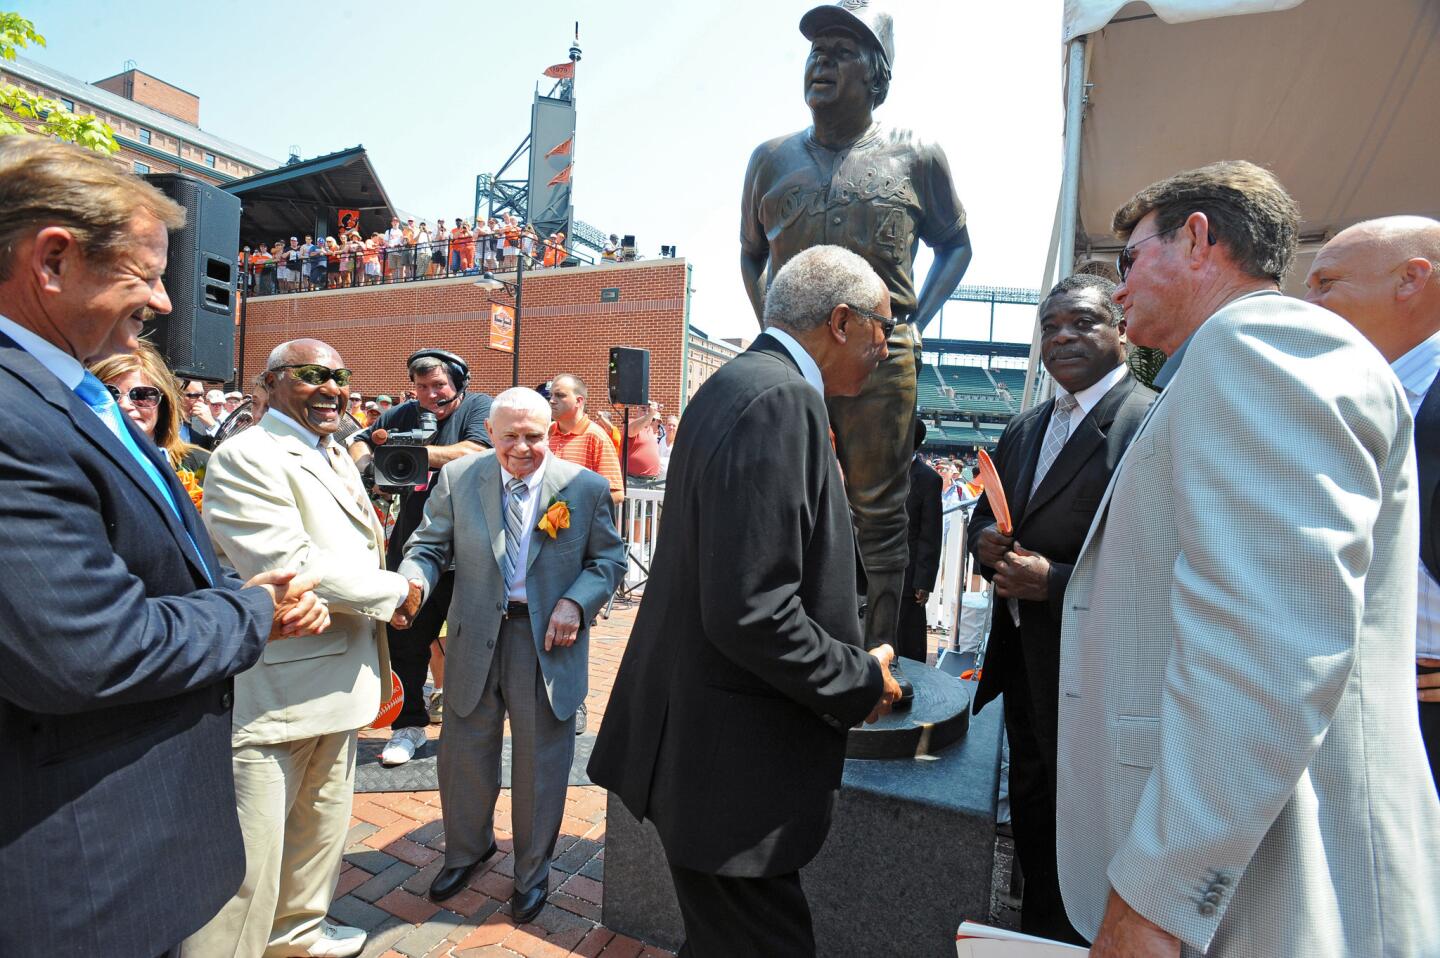 Former Orioles manager Earl Weaver, third from left, joins former Orioles players (l-r) Rick Dempsey, Don Buford, Frank Robinson, Eddie Murray, Jim Palmer and Cal Ripken Jr., after the unveiling of his statue at the center-field Legends' Garden of Oriole Park at Camden Yards on Saturday.